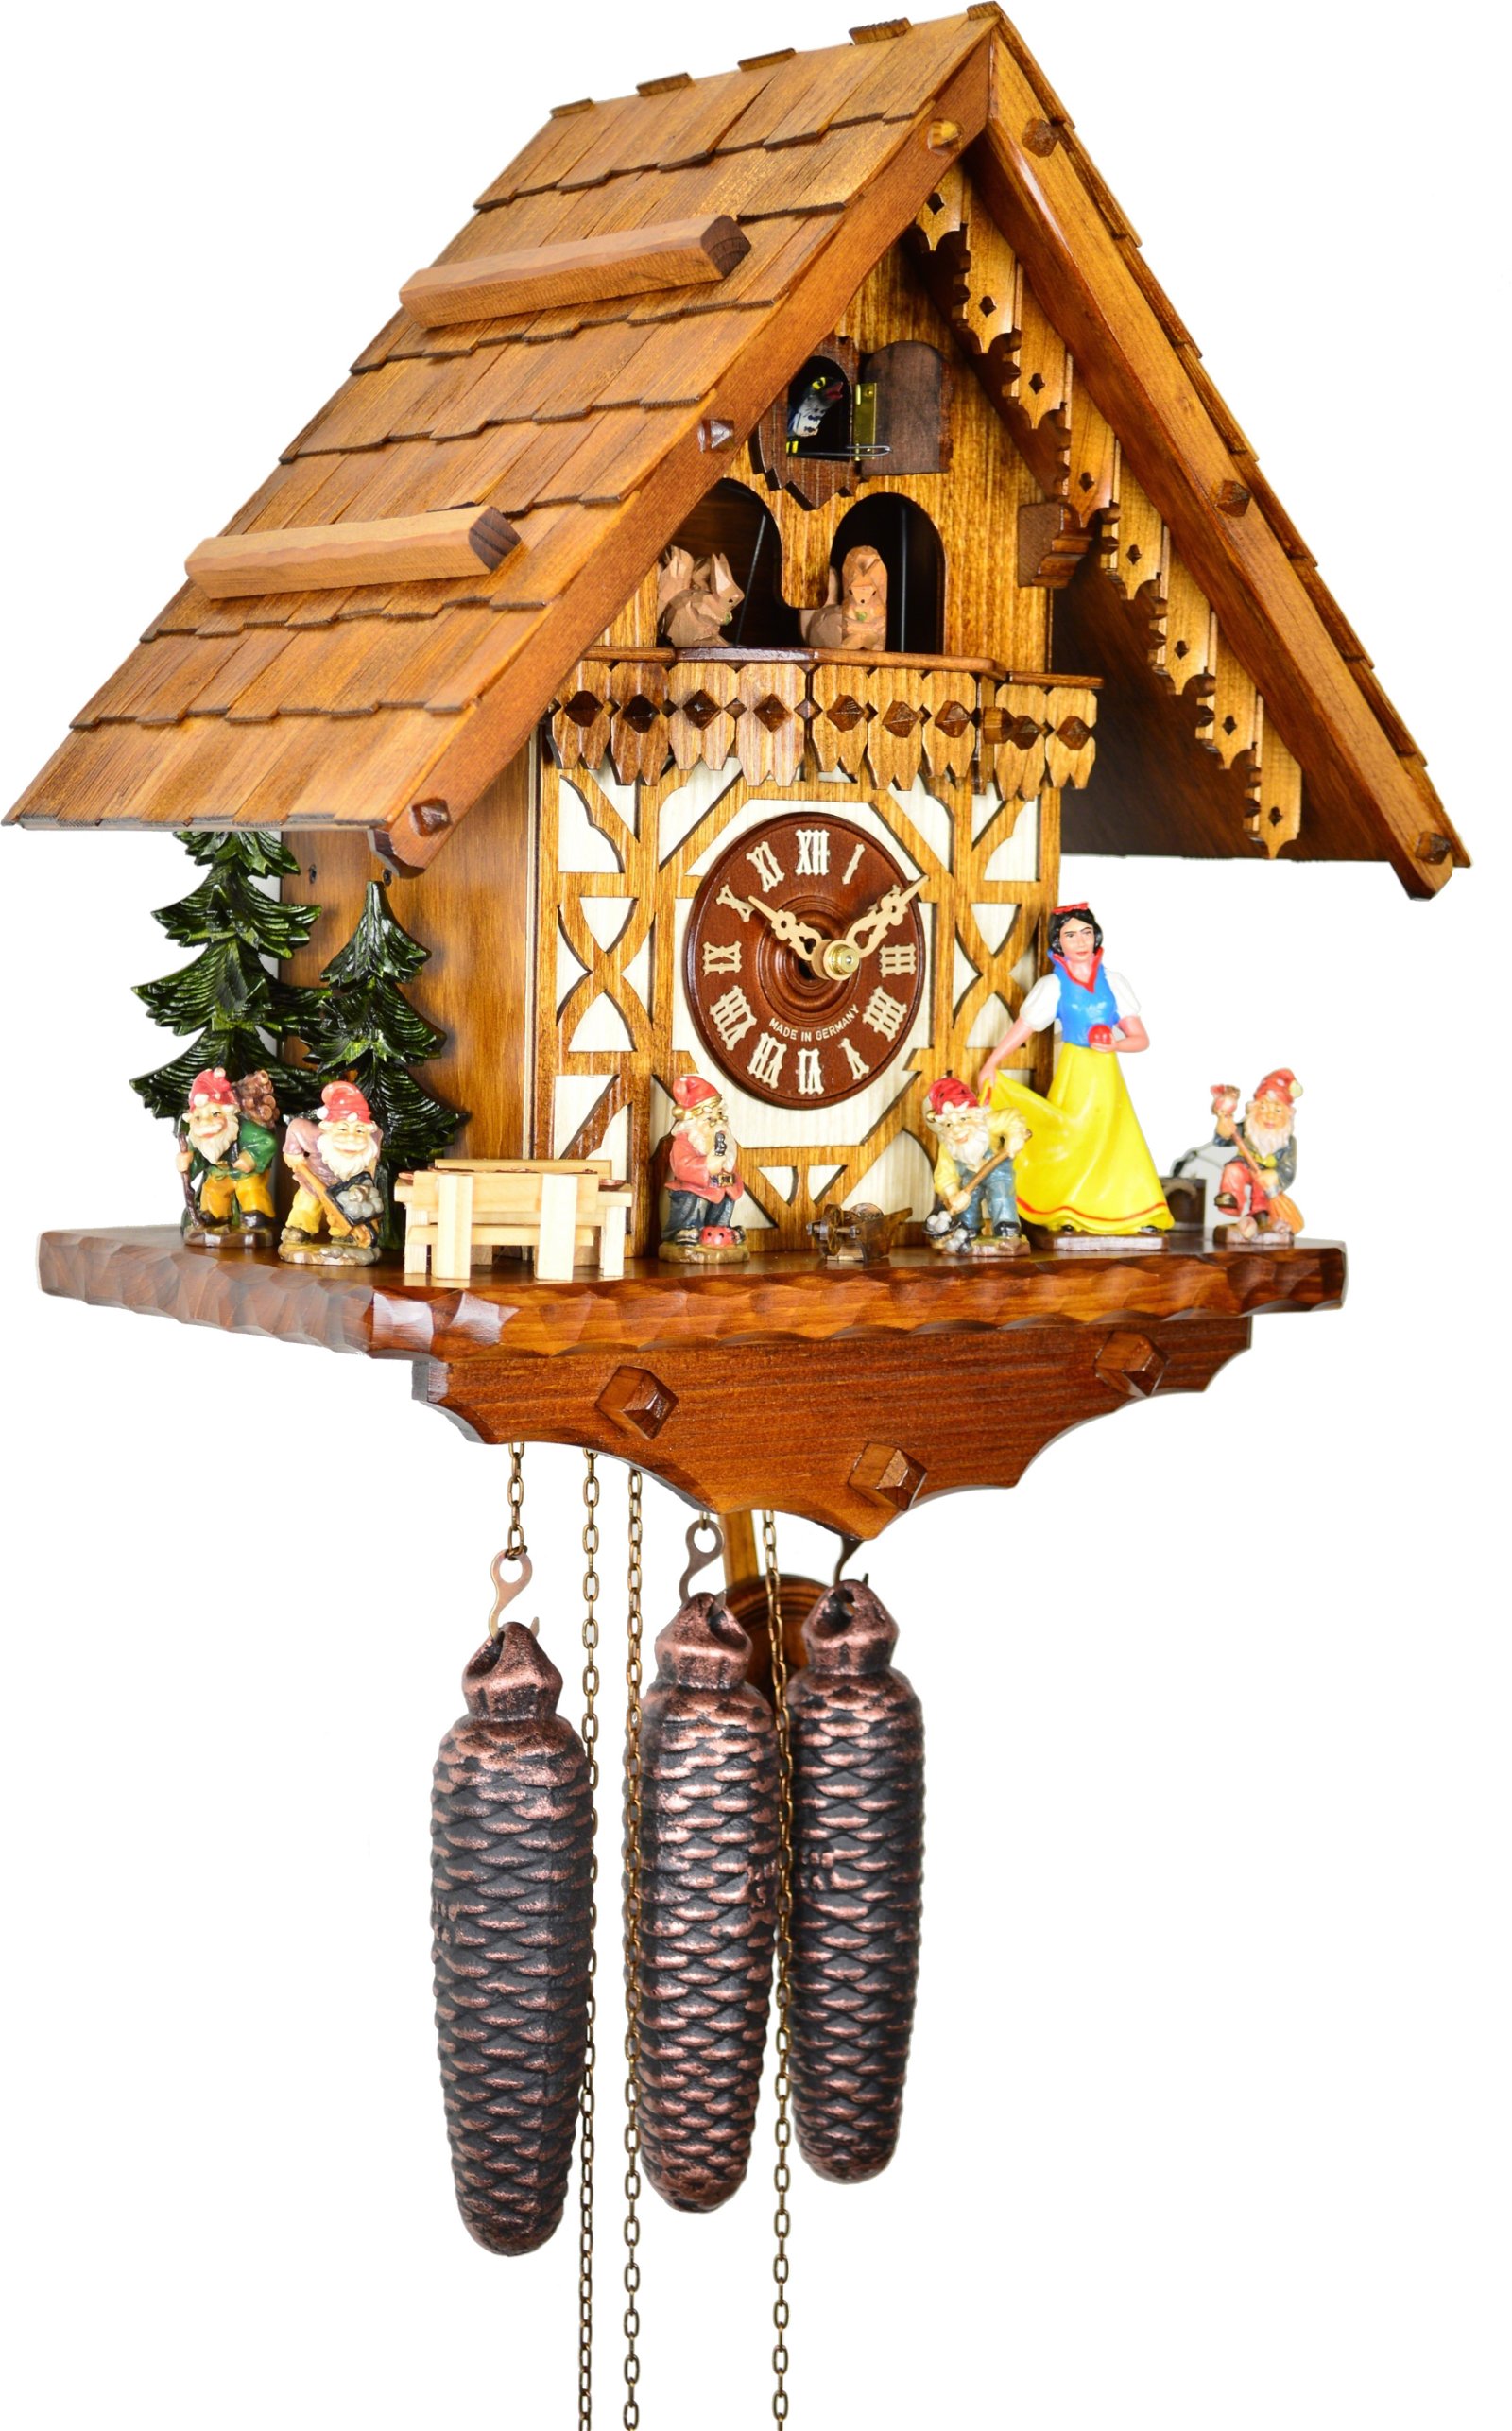 Cuckoo Clock Chalet Style 8 Day Movement 41cm by August Schwer